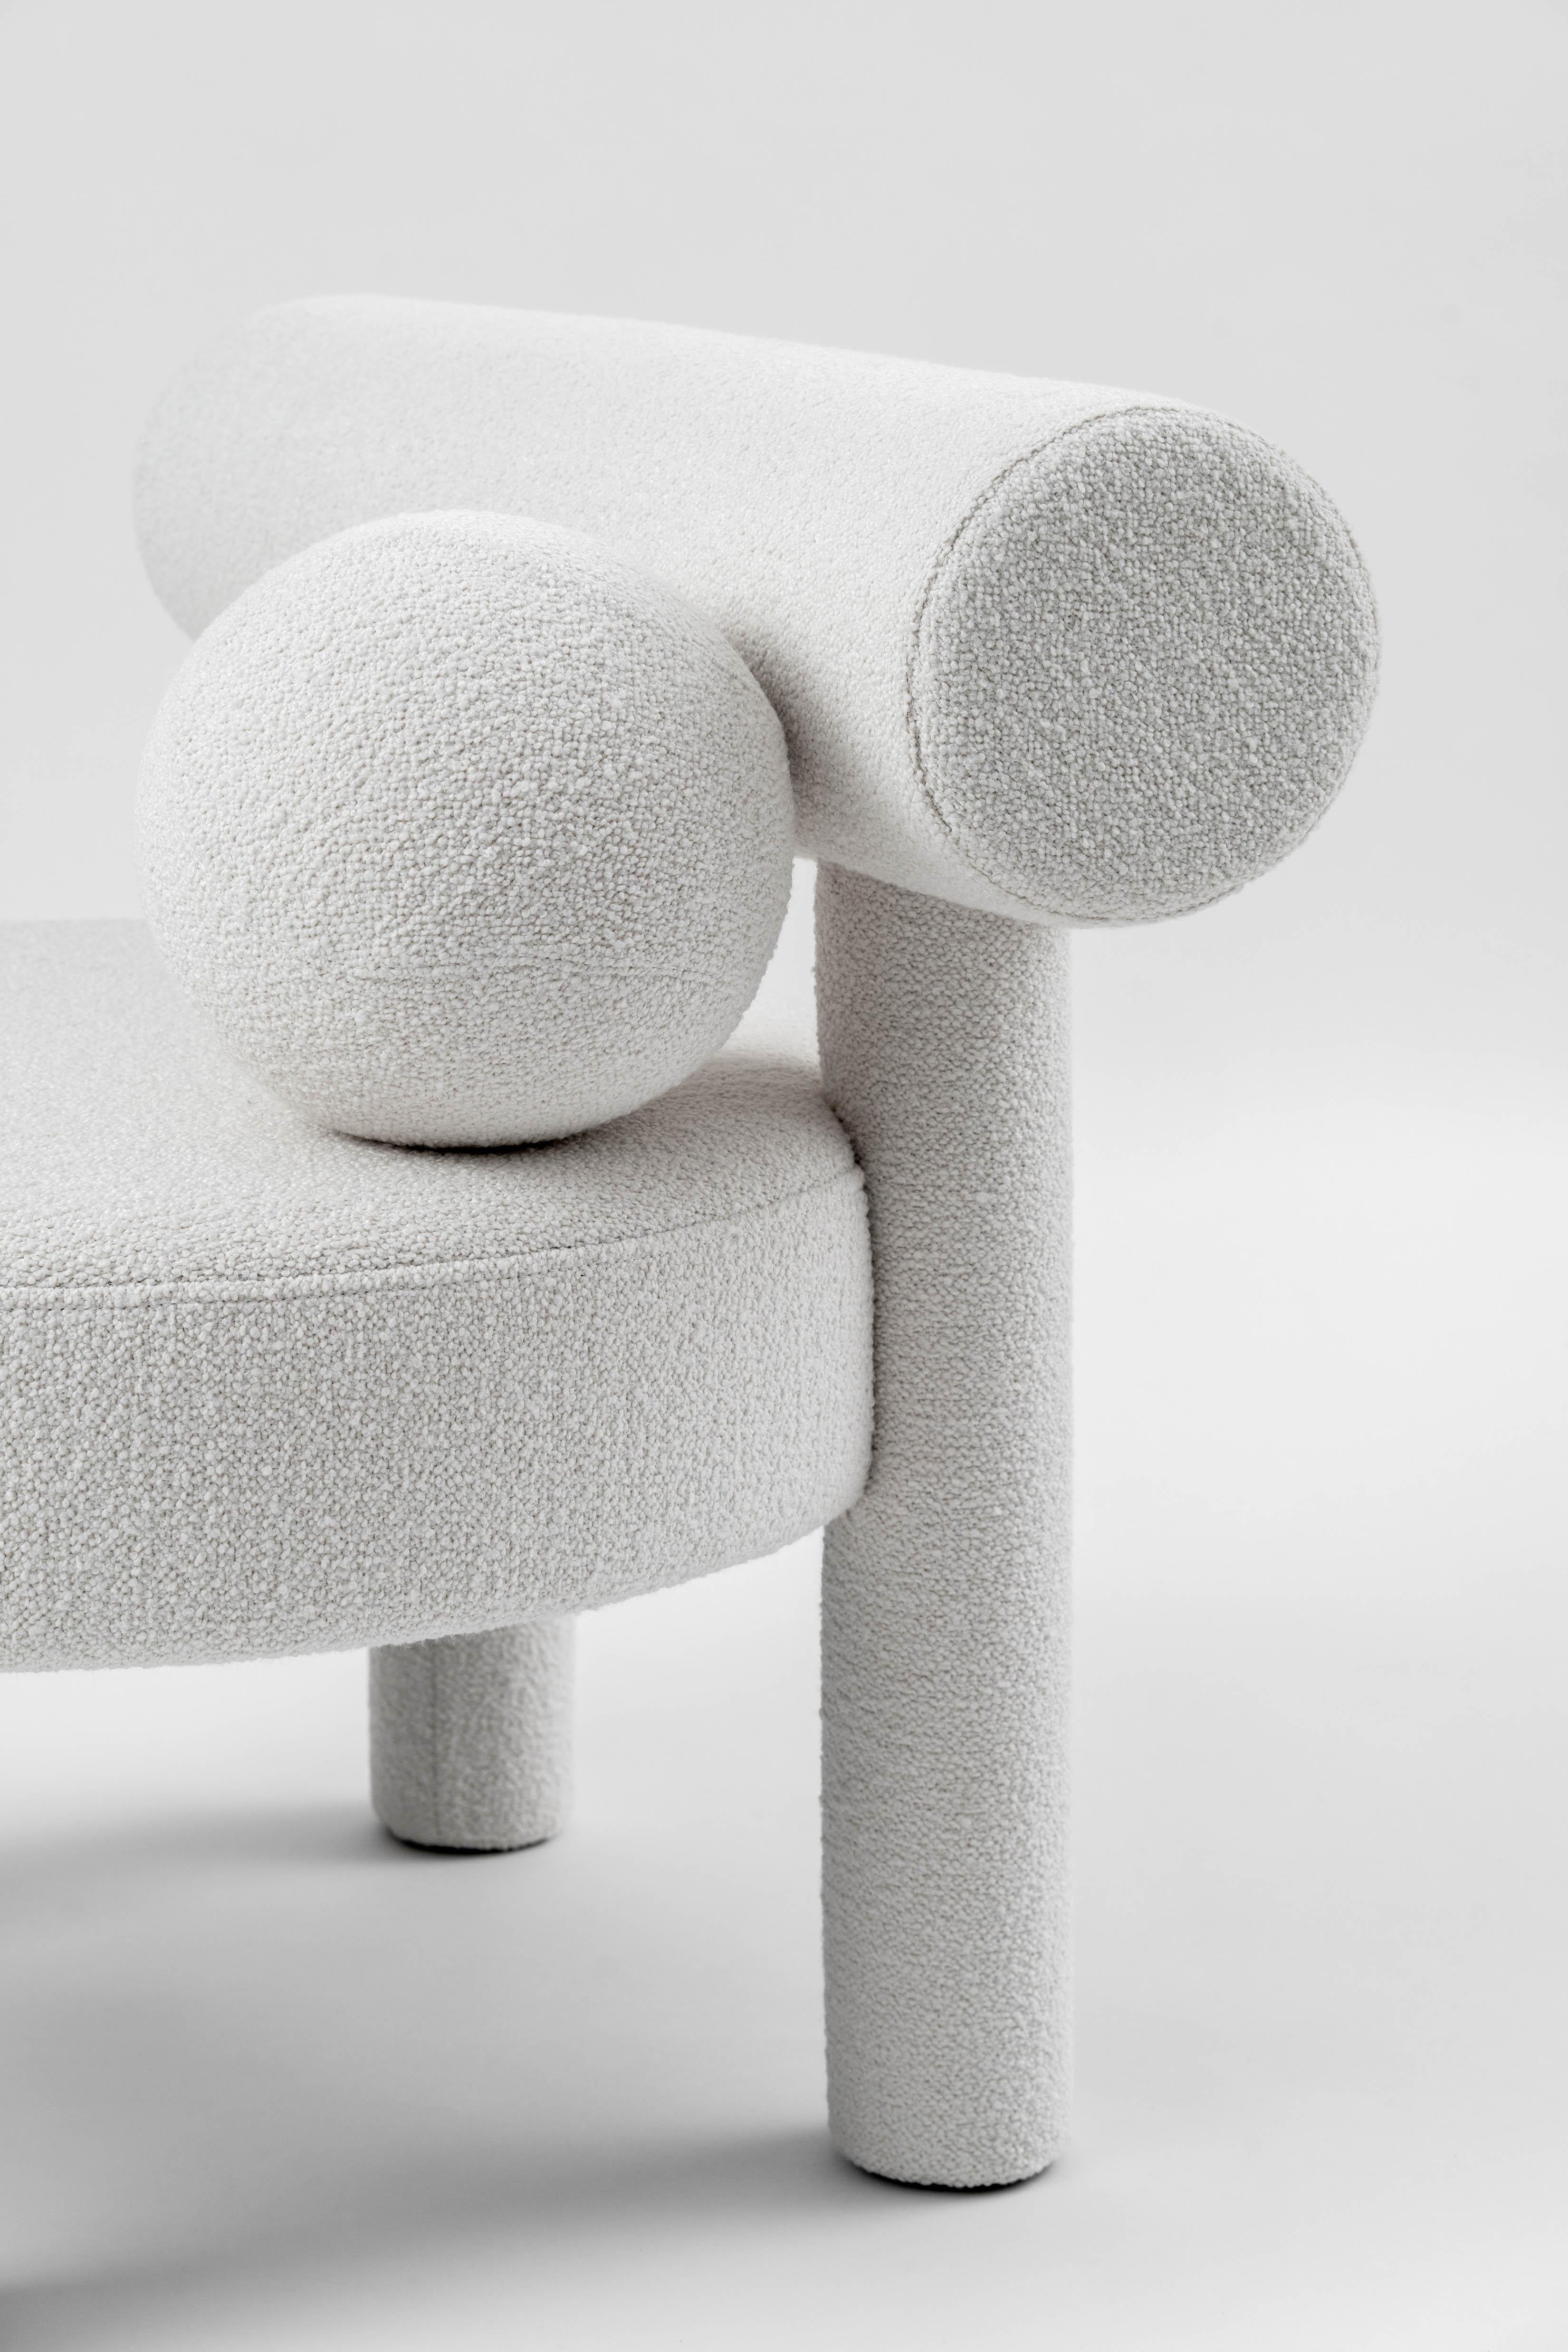 Low Chair 'GROPIUS CS1' by NOOM, Fully upholstered in Bouclé, White For Sale 2